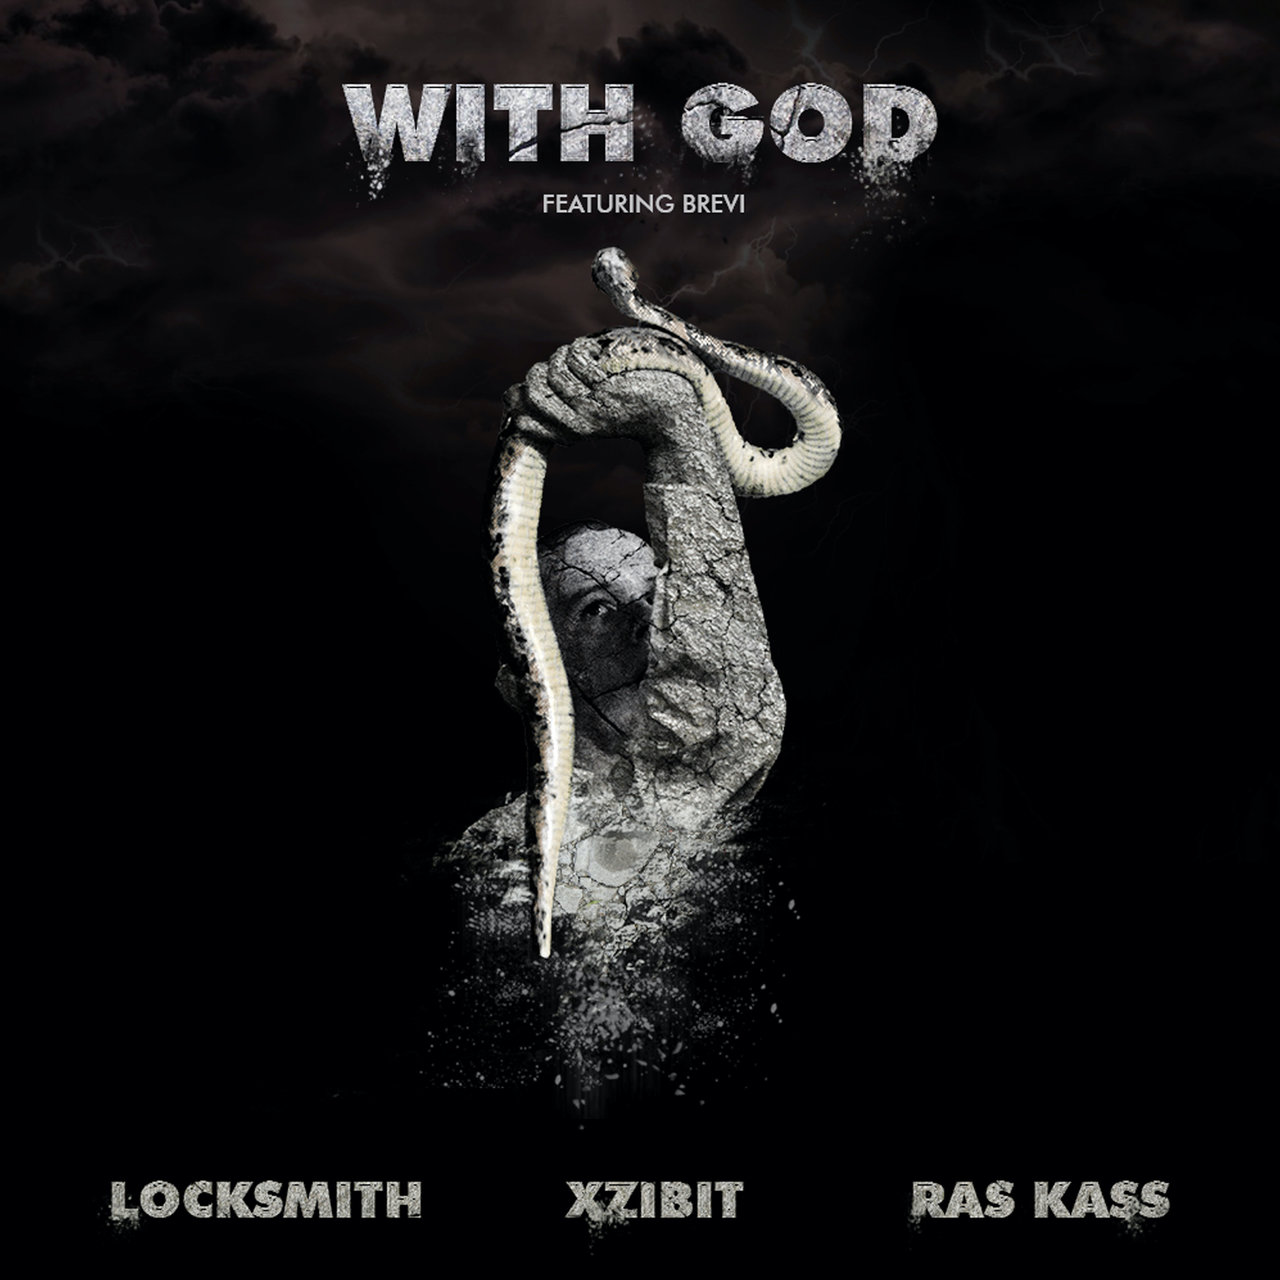 Locksmith, Xzibit and Ras Kass - With God (ft. Brevi) (Cover)